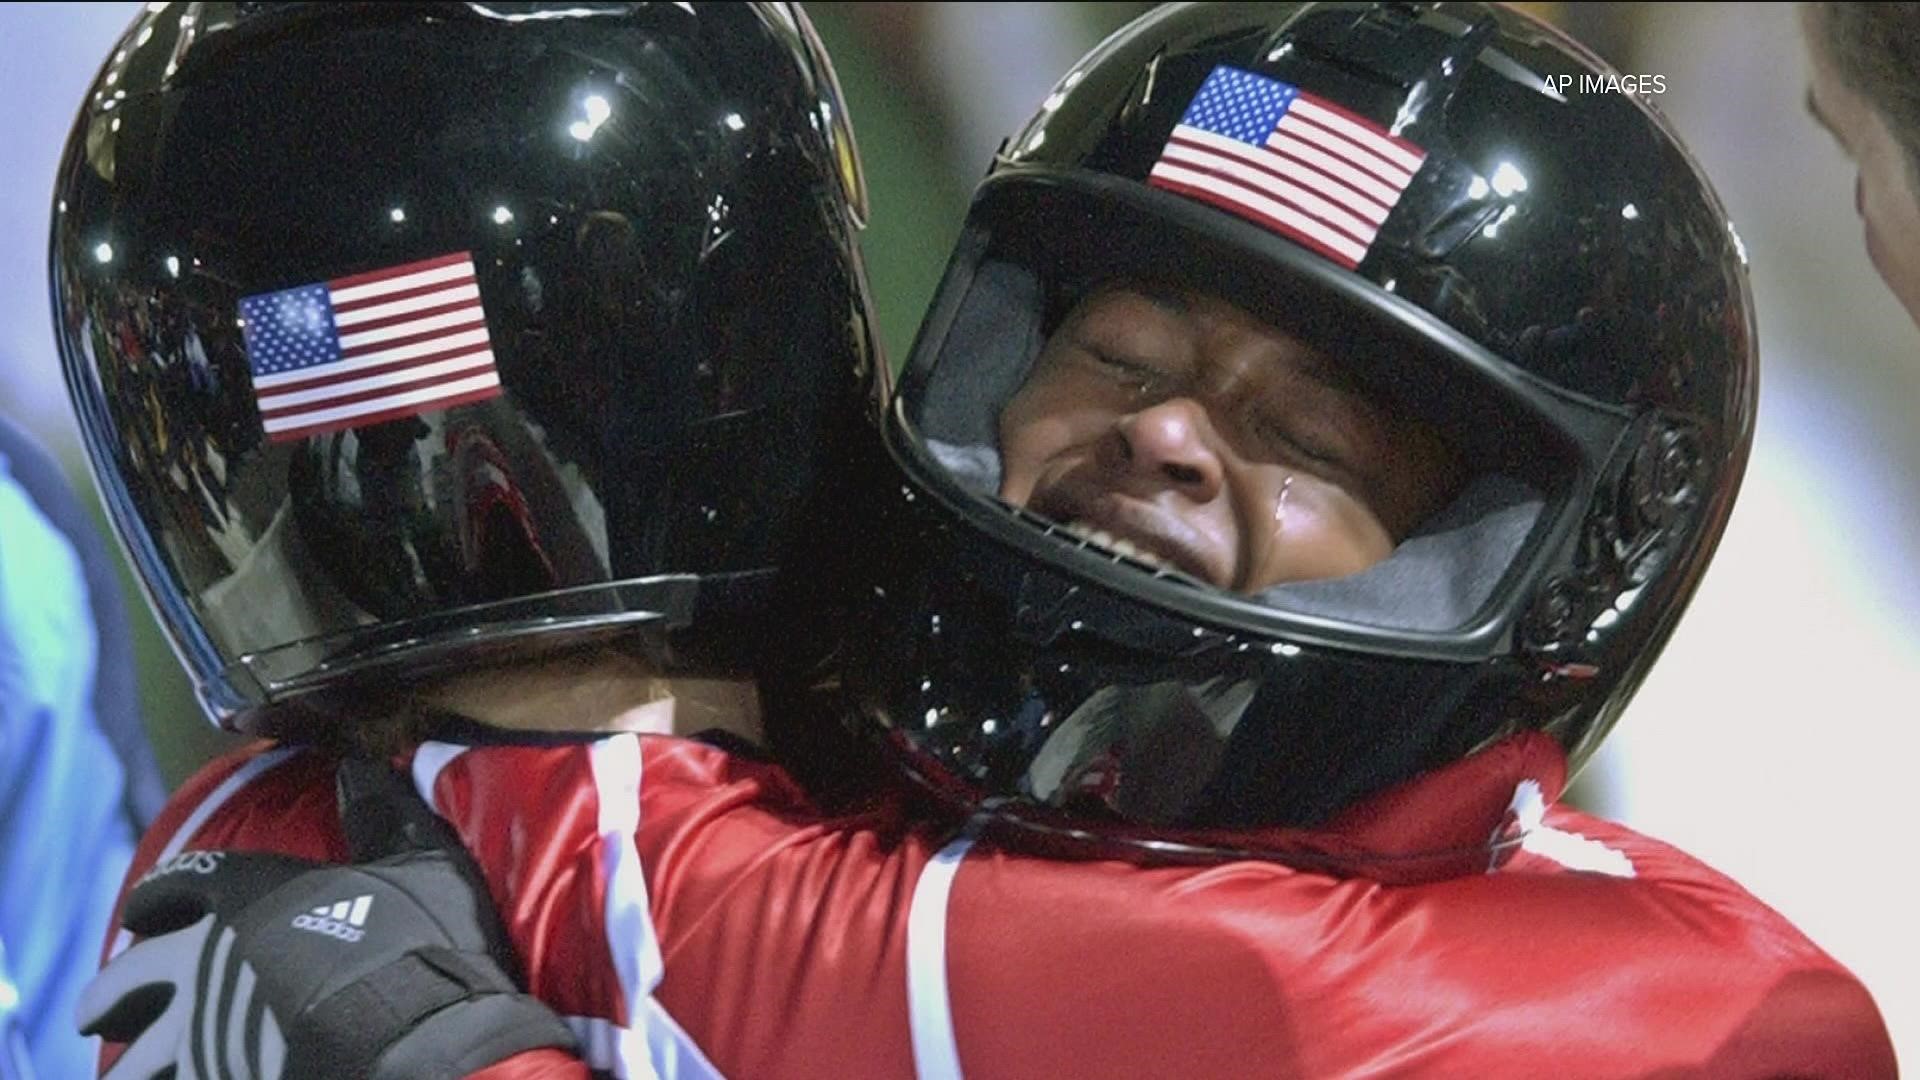 Elana Meyers Taylor hopes to follow in the footsteps of one of her mentors.